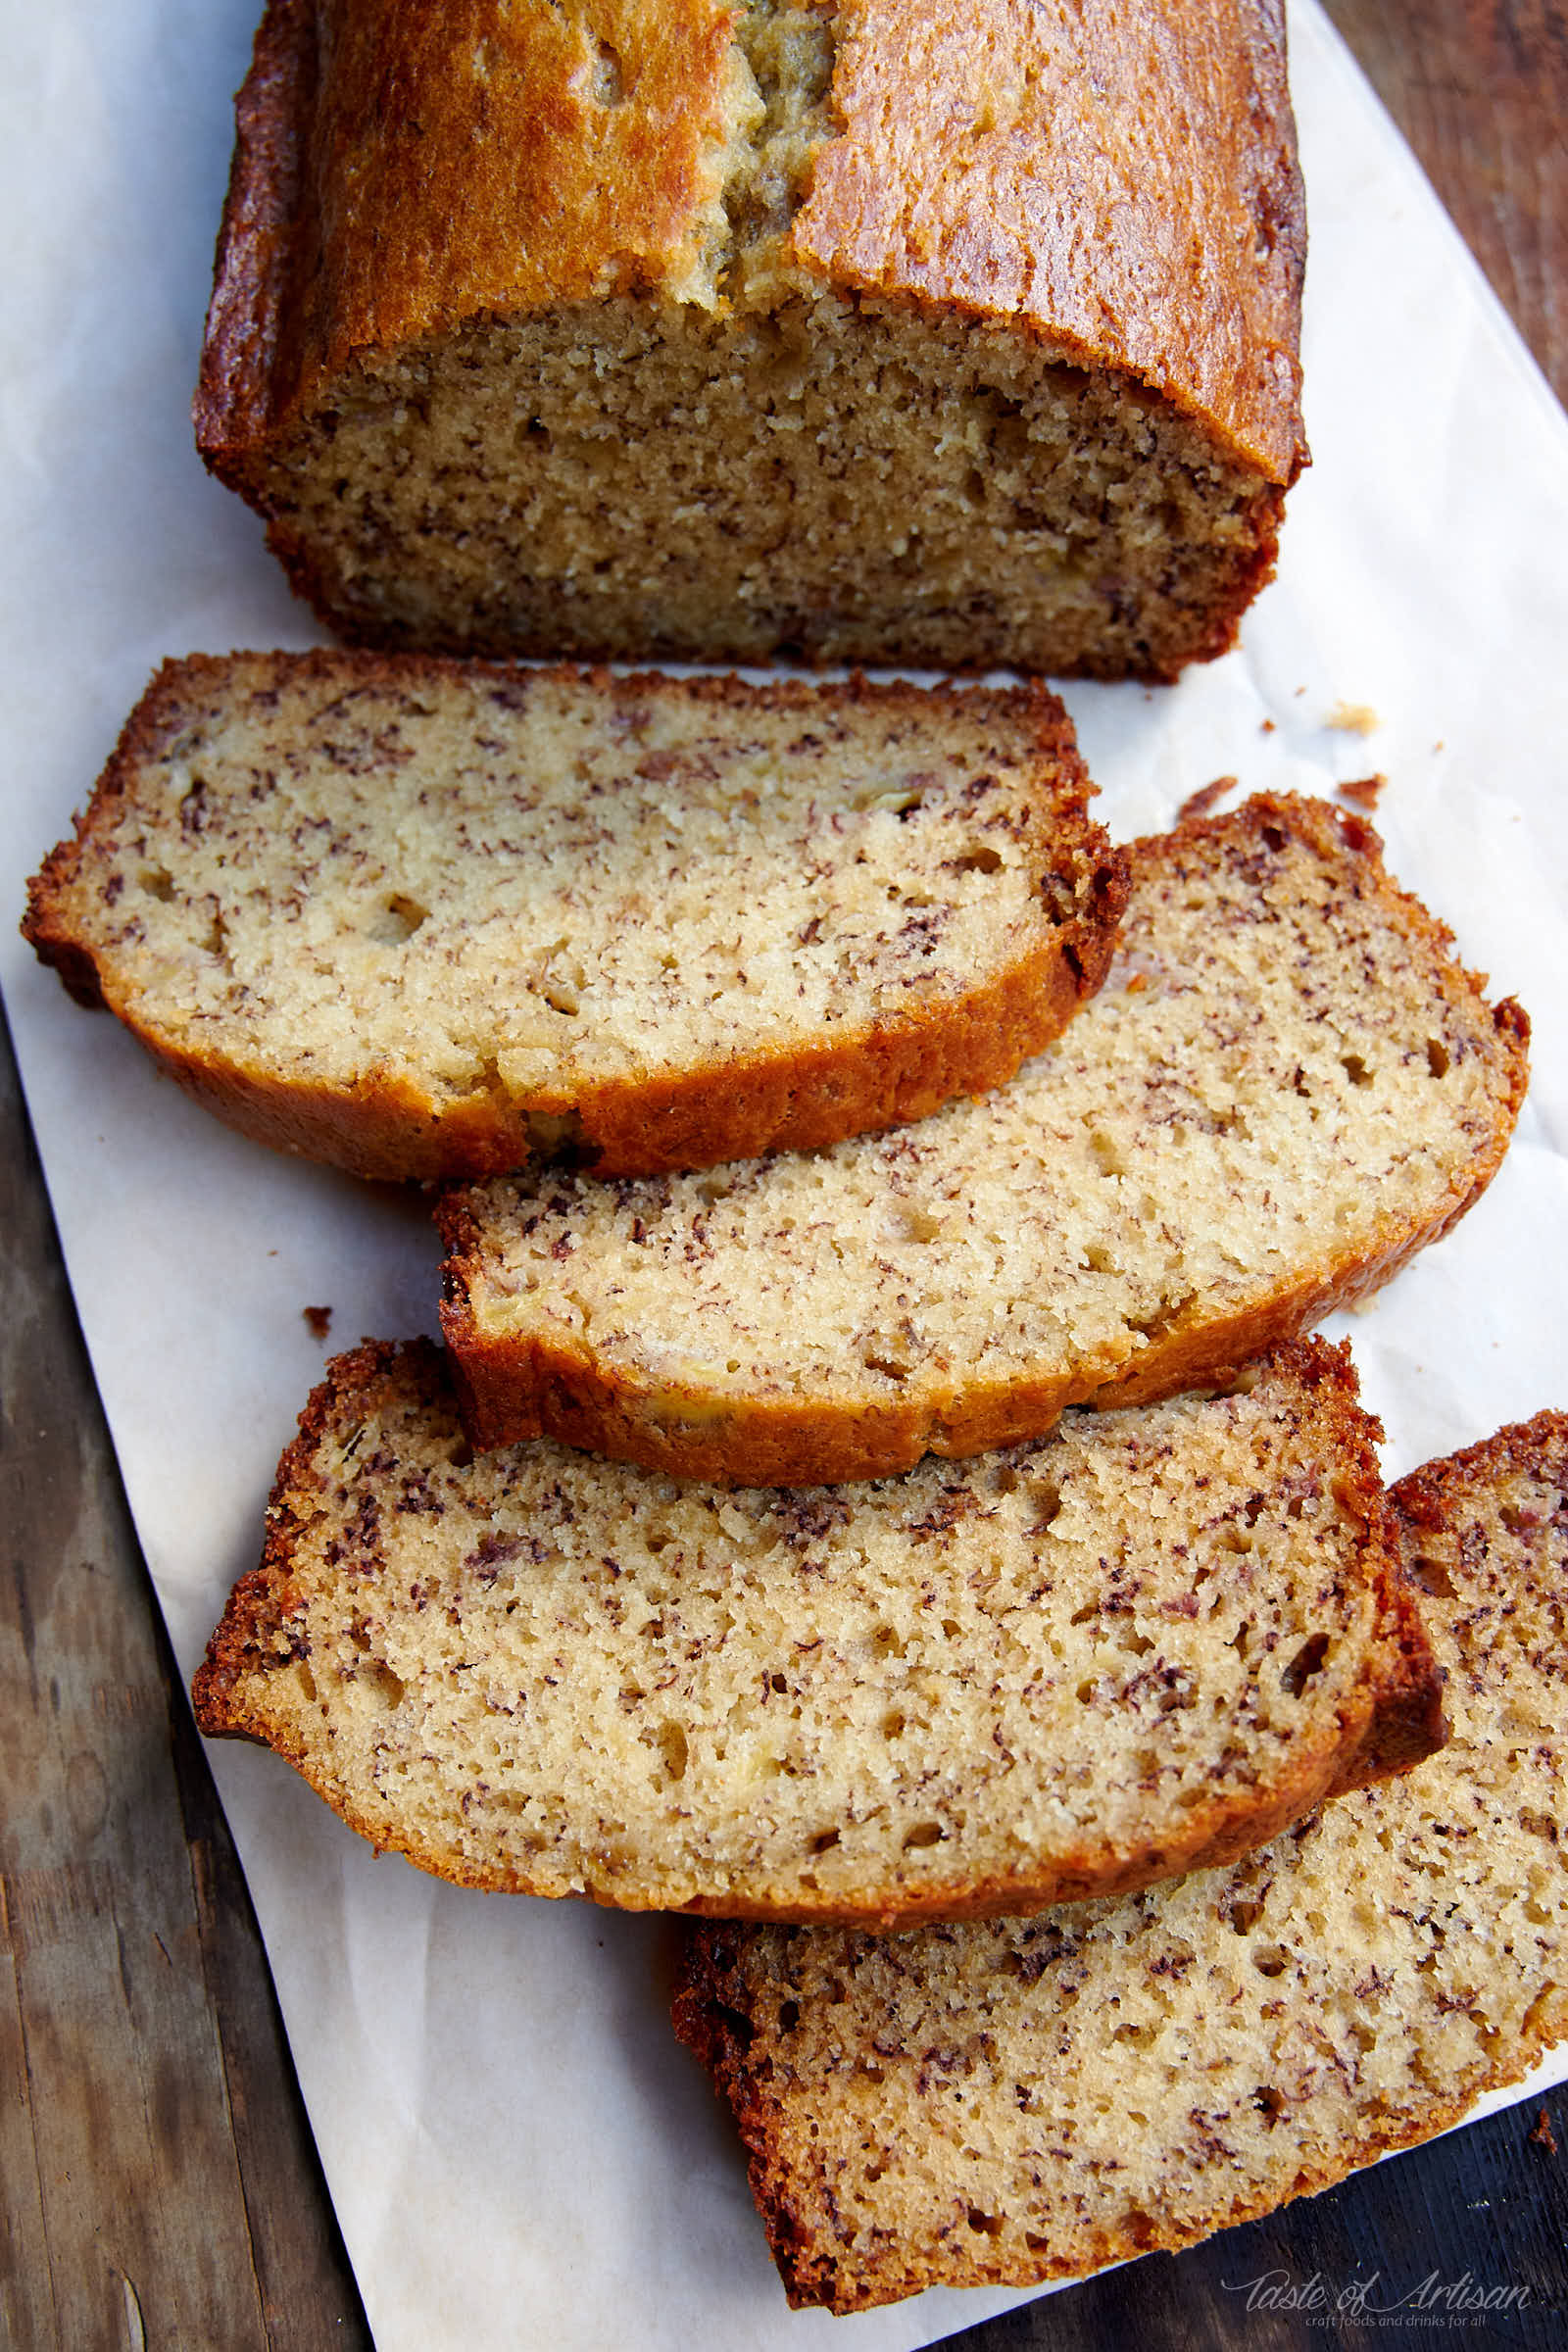 Best tasting Banana Bread ever! No need for a mixer! Delicious, moist and simple classic banana bread recipe. | Taste of Artisan